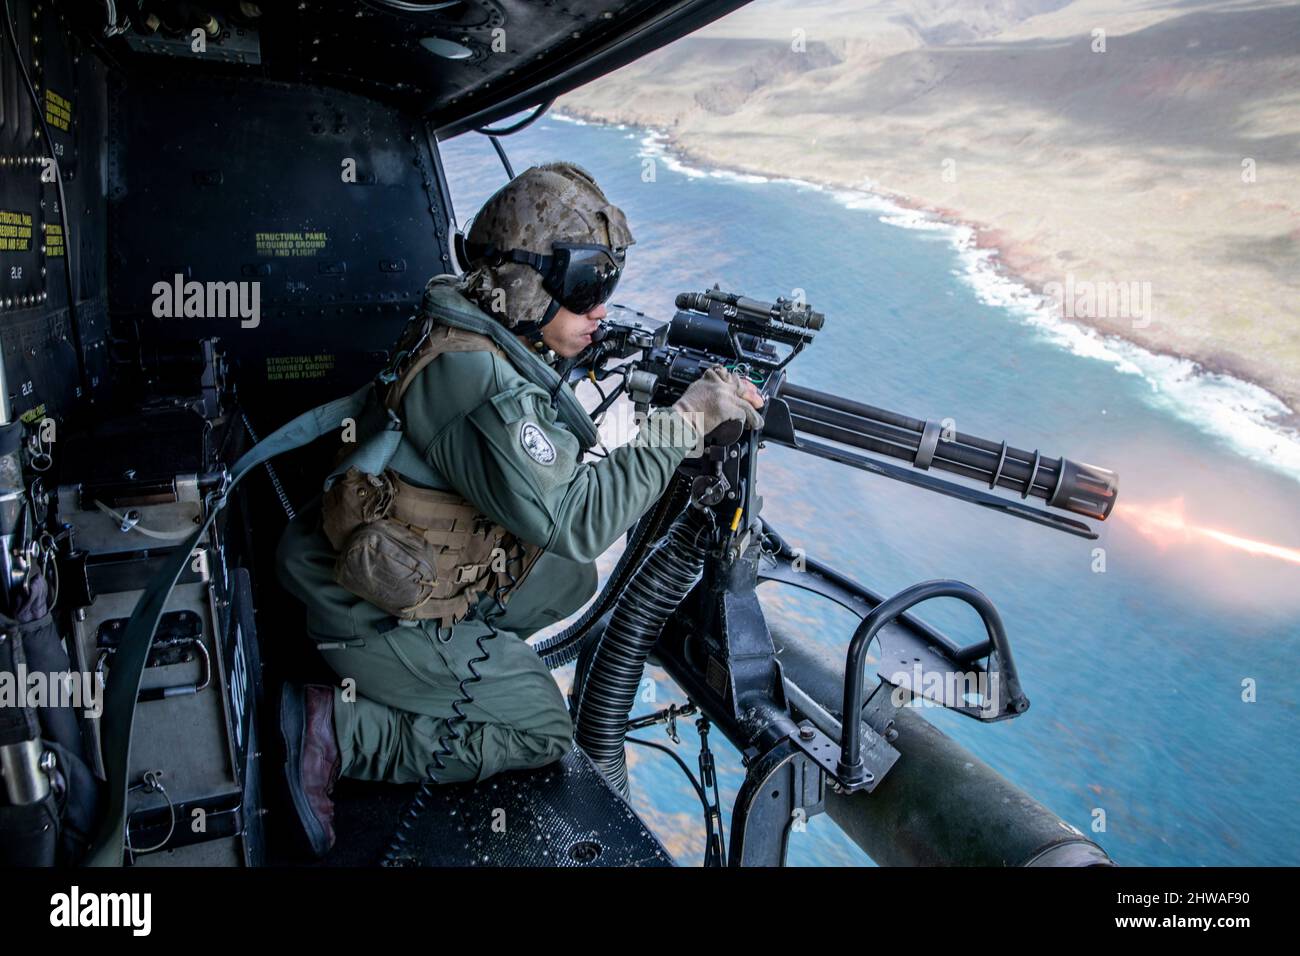 San Clemente Island, USA. 16th Feb, 2022. U.S. Marine Corps Sgt. William Ton, a crew chief assigned to Marine Attack Light Attack Helicopter Squadron 469, Marine Aircraft Group 39, 3rd Marine Aircraft Wing (MAW), fires a GAU-17 minigun during a live fire range on a UH-1Y Venom at San Clemente Island, California, Feb. 16, 2022. Winter Fury 22 provides the Marines of 3rd MAW with realistic, relevant training opportunities necessary to respond to any crisis across the globe and win decisively in a highly contested, maritime conflict. (Credit Image: © U.S. Army/ZUMA Press Wire Serv Stock Photo